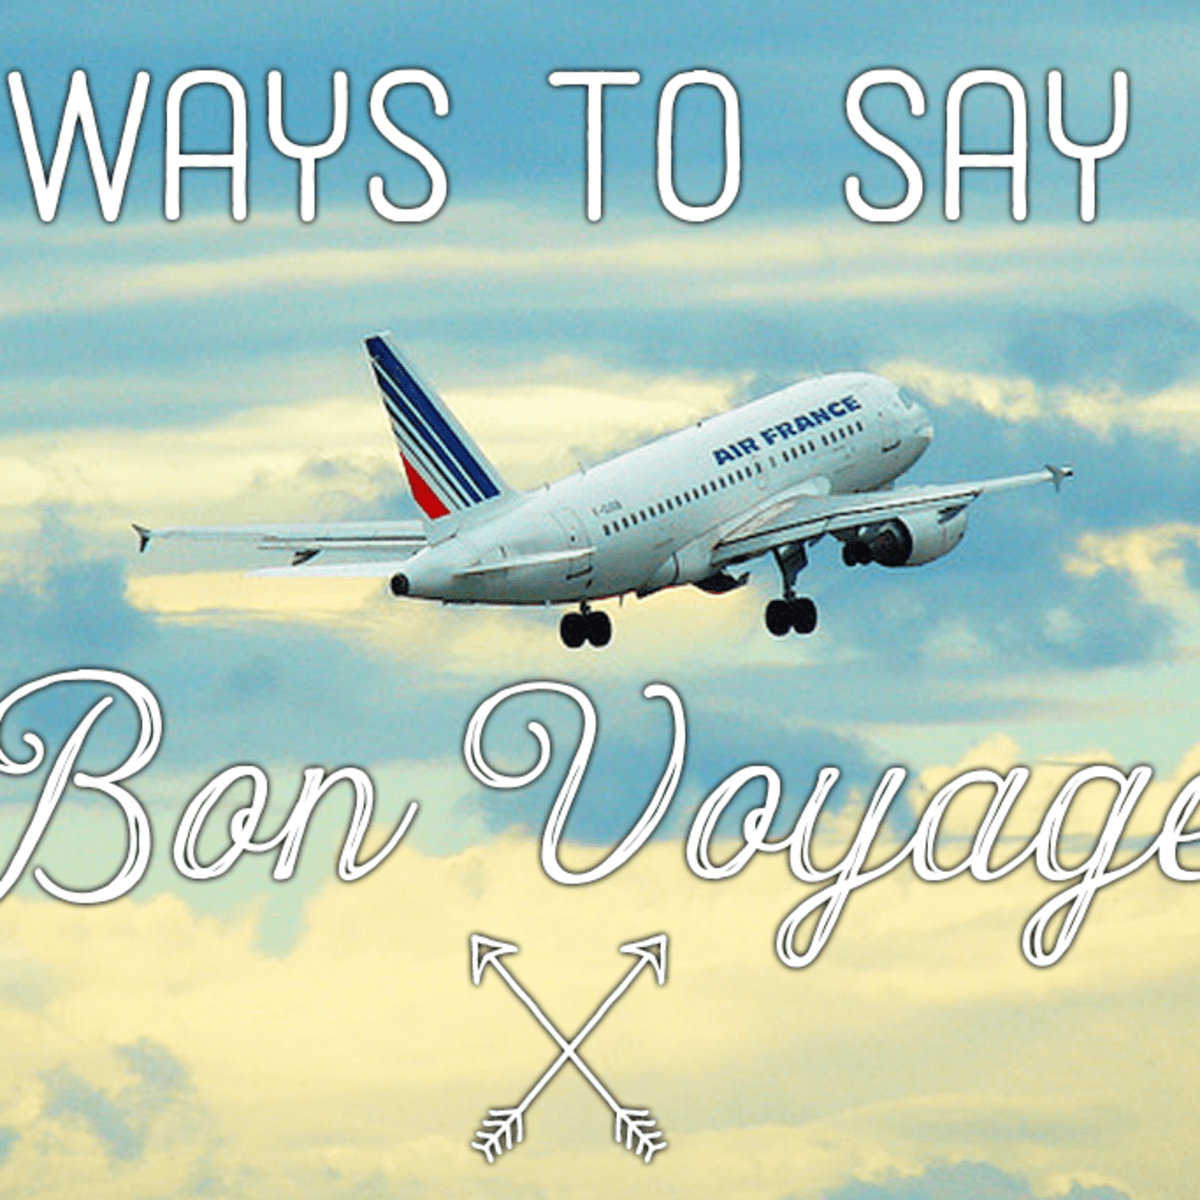 bon voyage meaning in tagalog